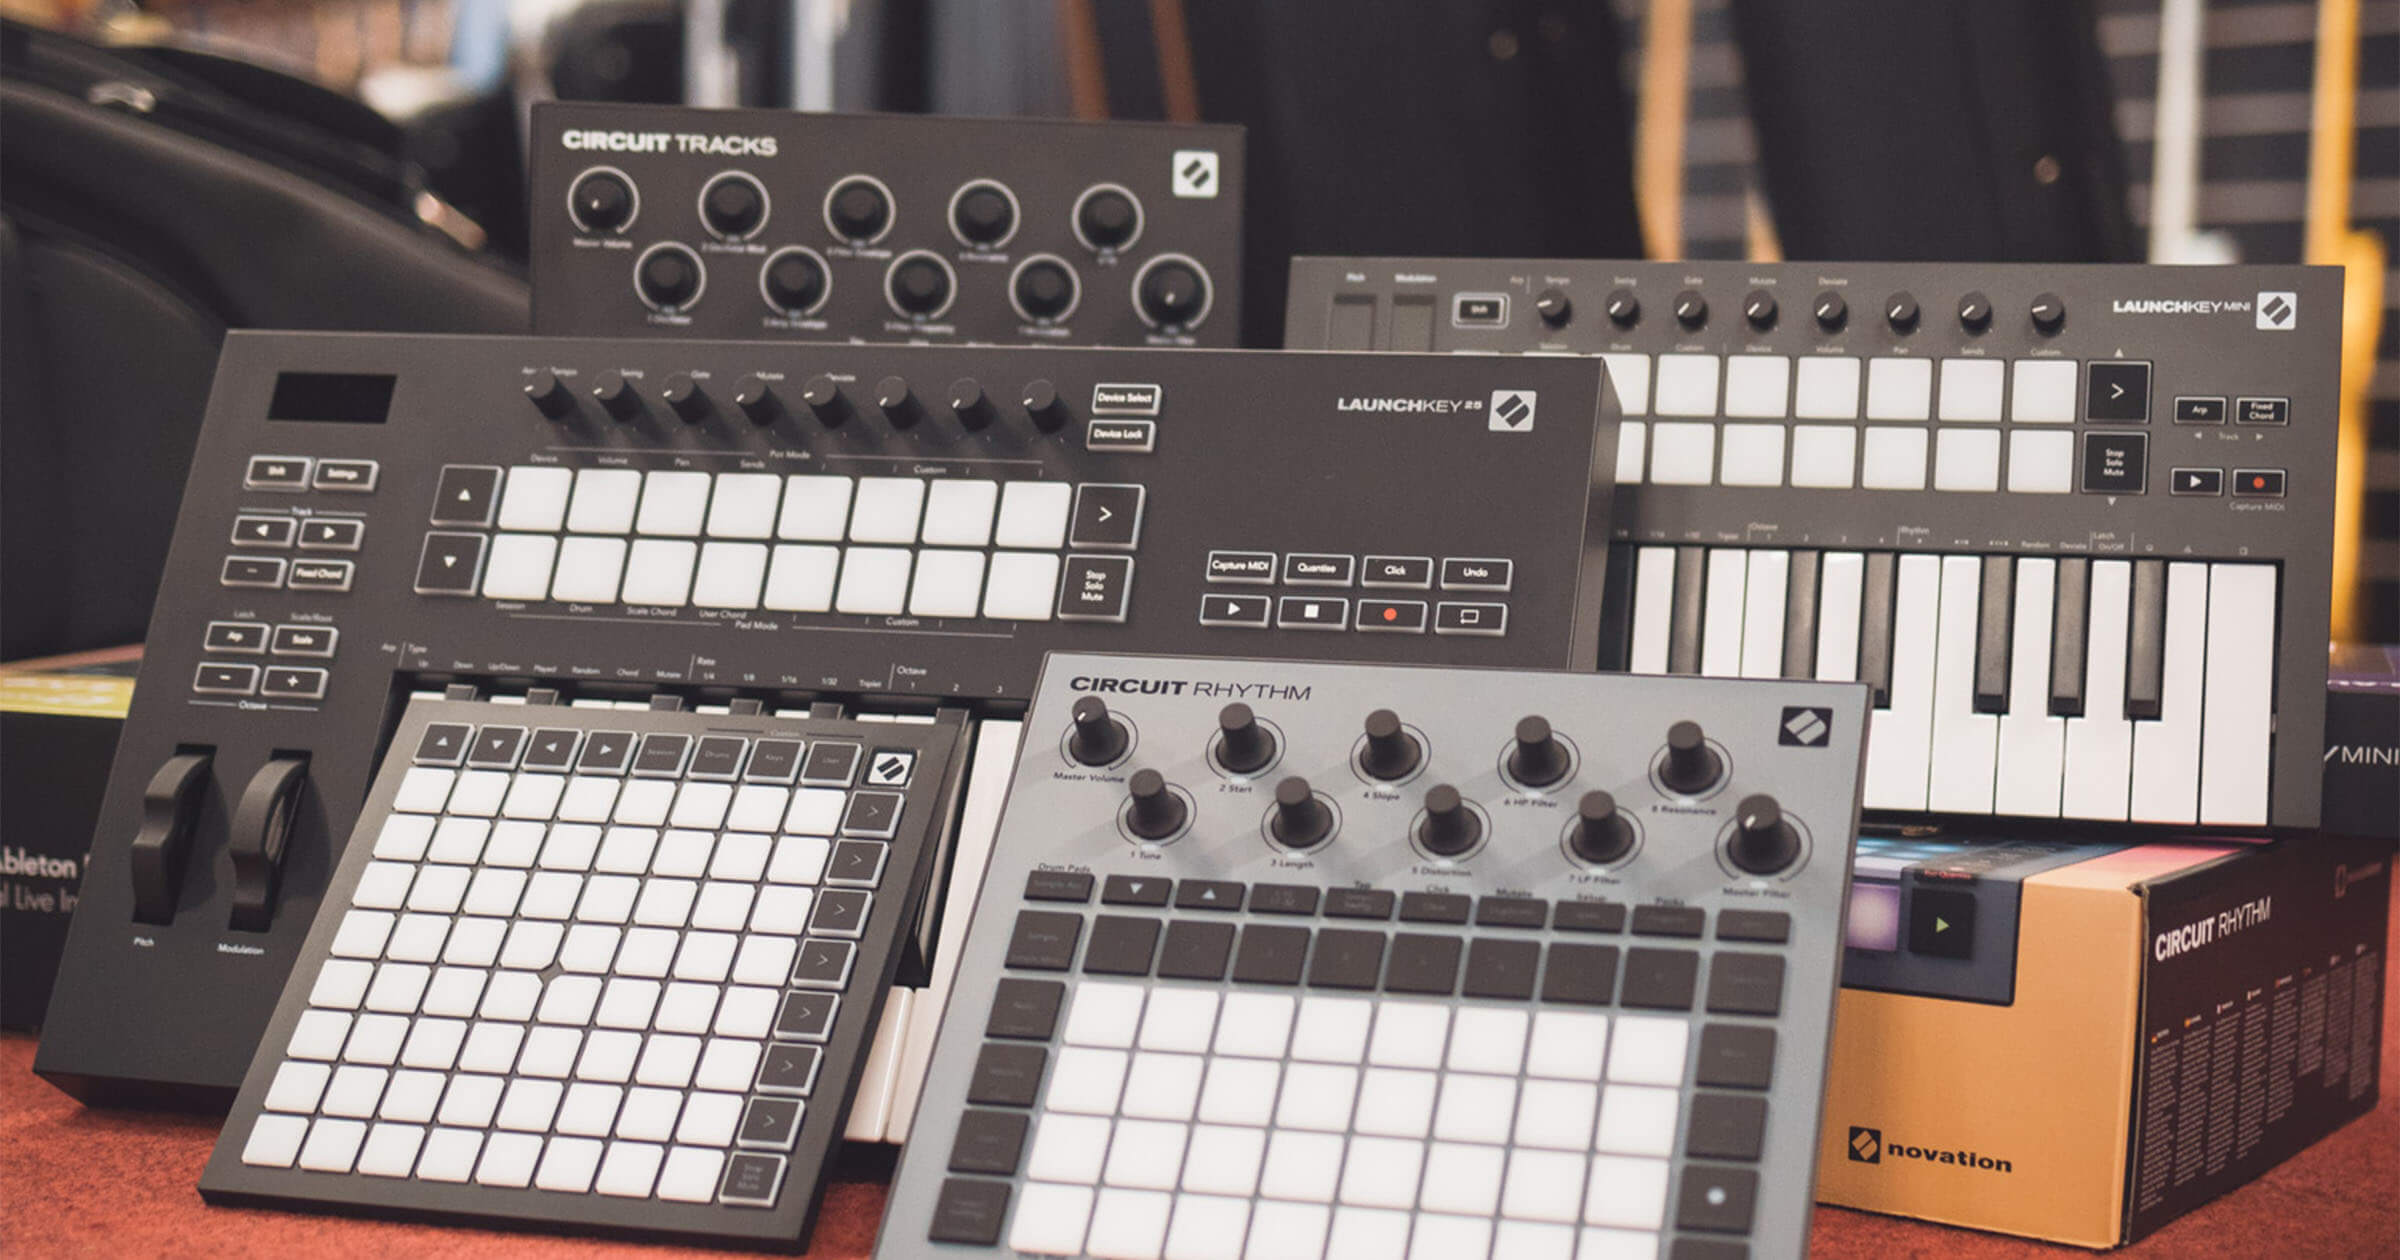 The Best MIDI Controllers for Under $300 for 2022 - Swee Lee Blog